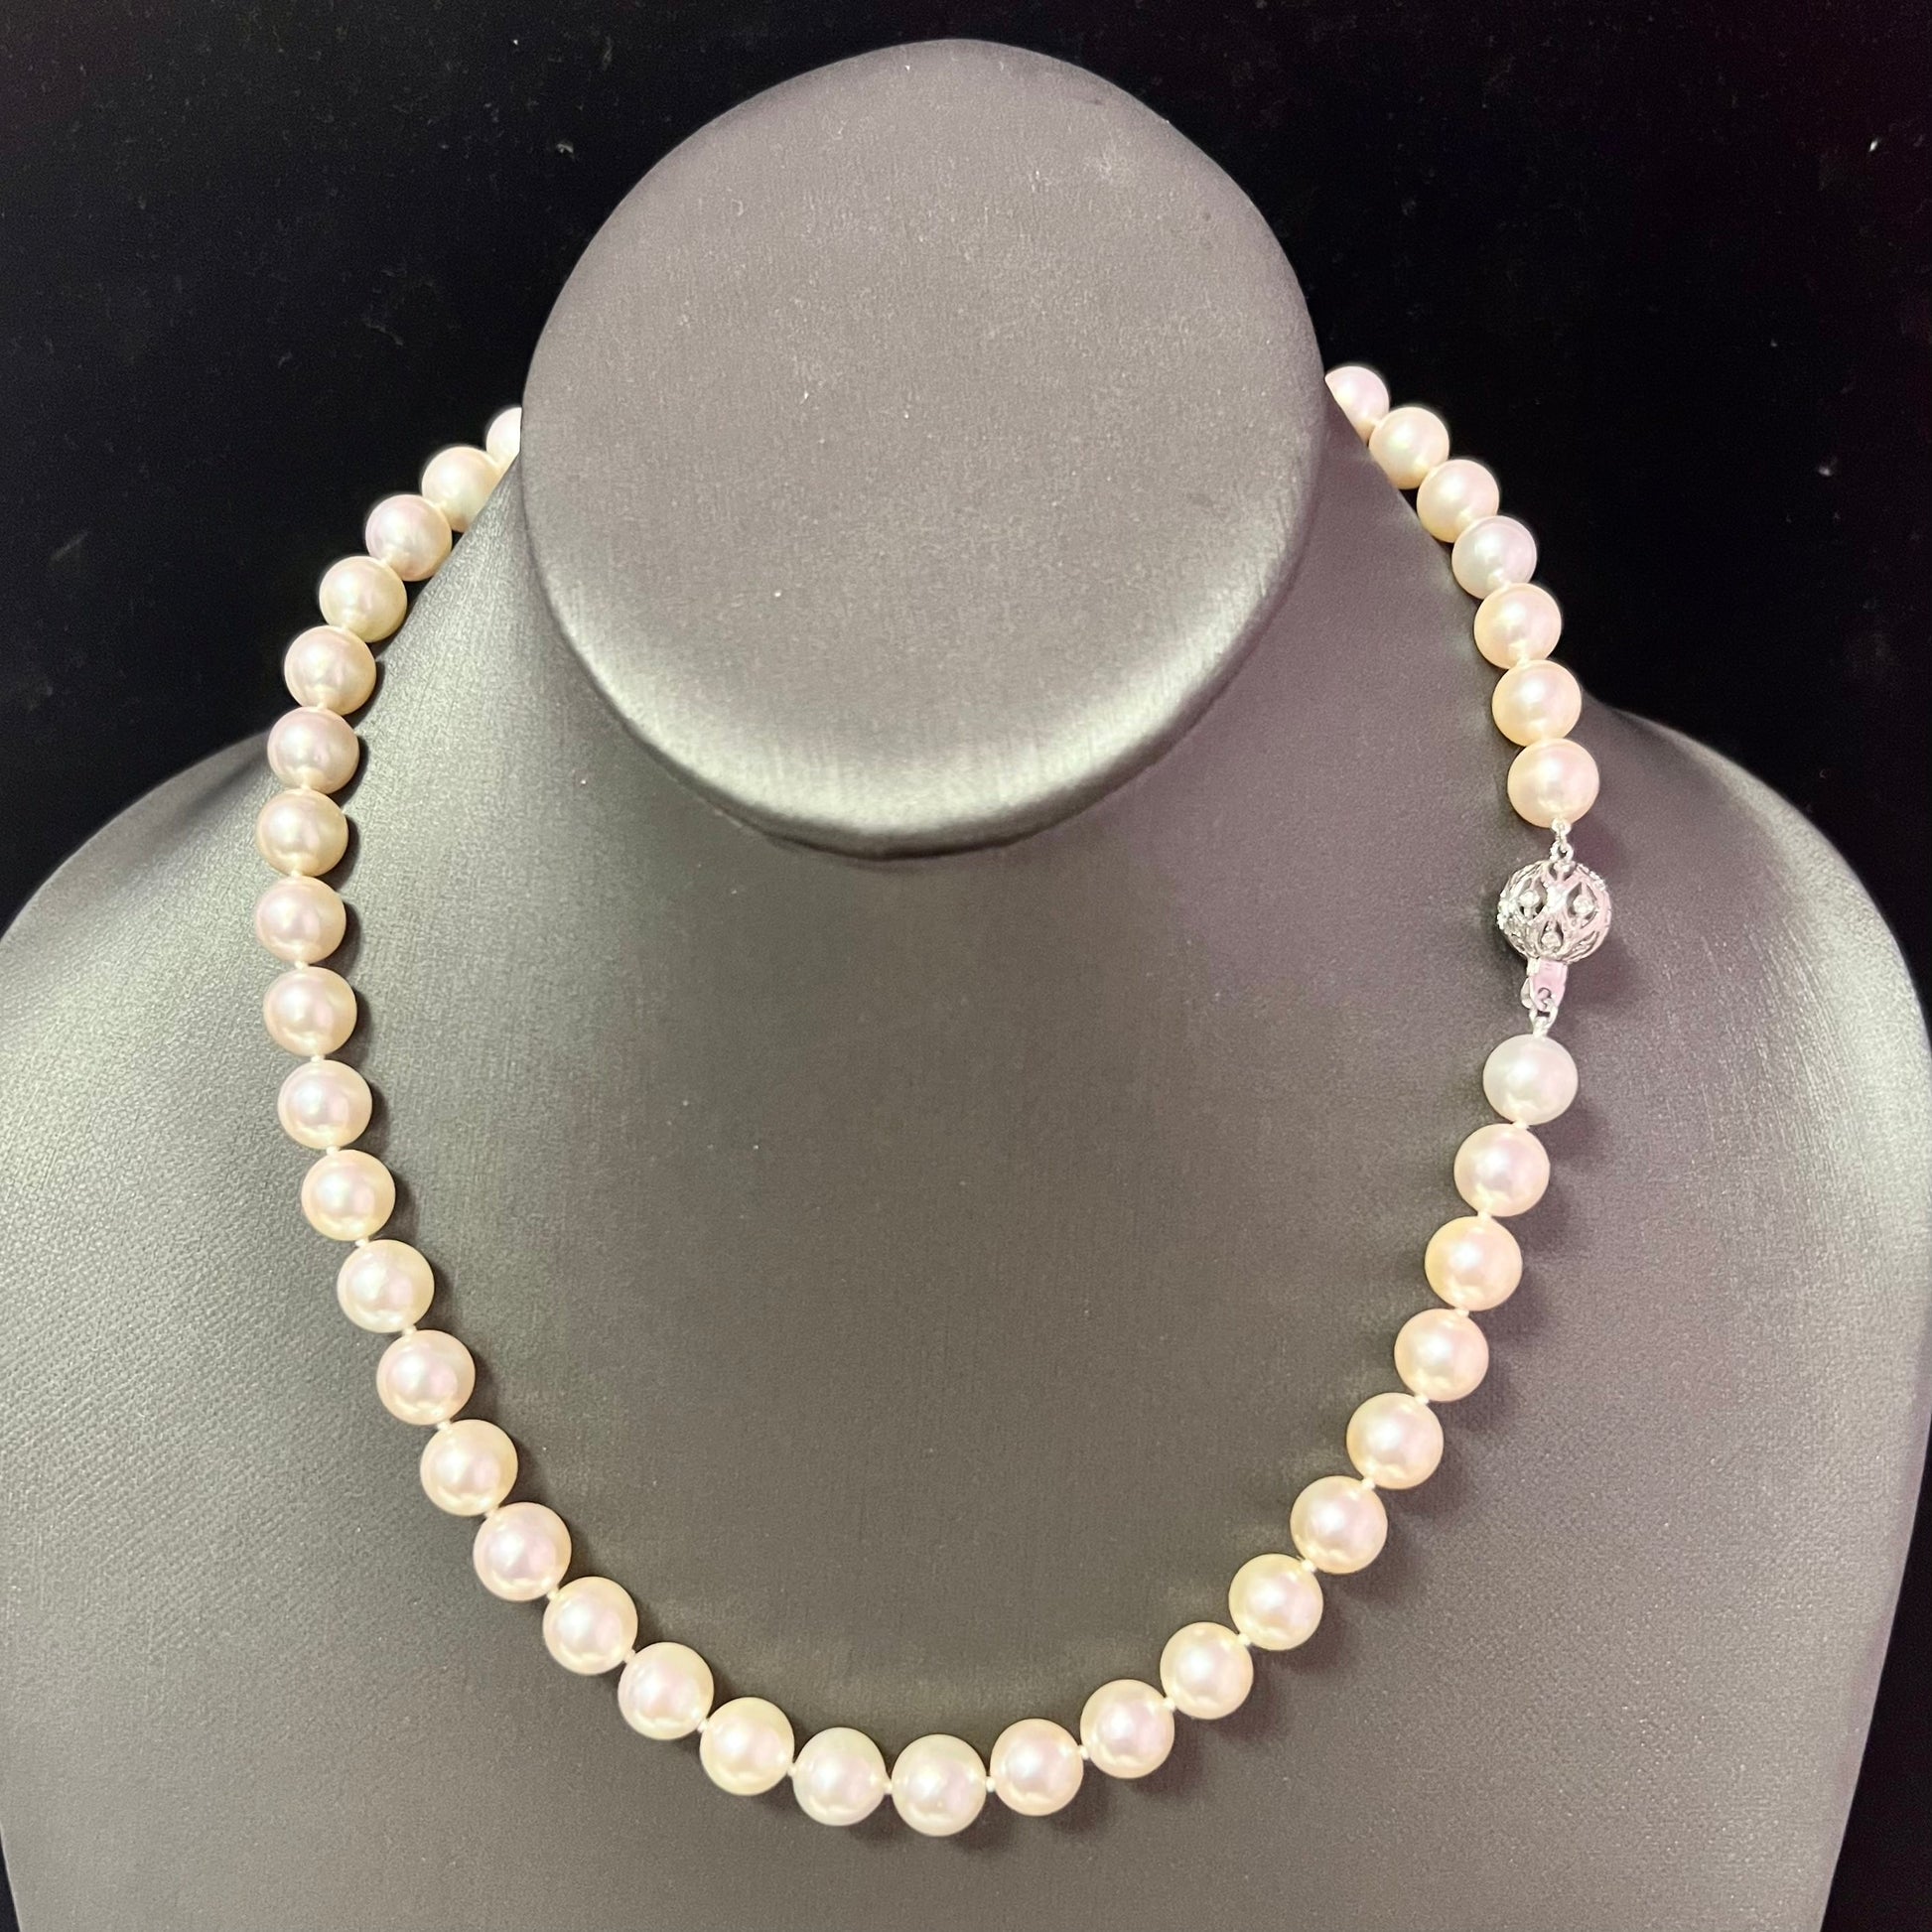 Natural Akoya Pearl Diamond Necklace 18" 14k White Gold 9 mm Certified $4,950 308089 - Certified Fine Jewelry